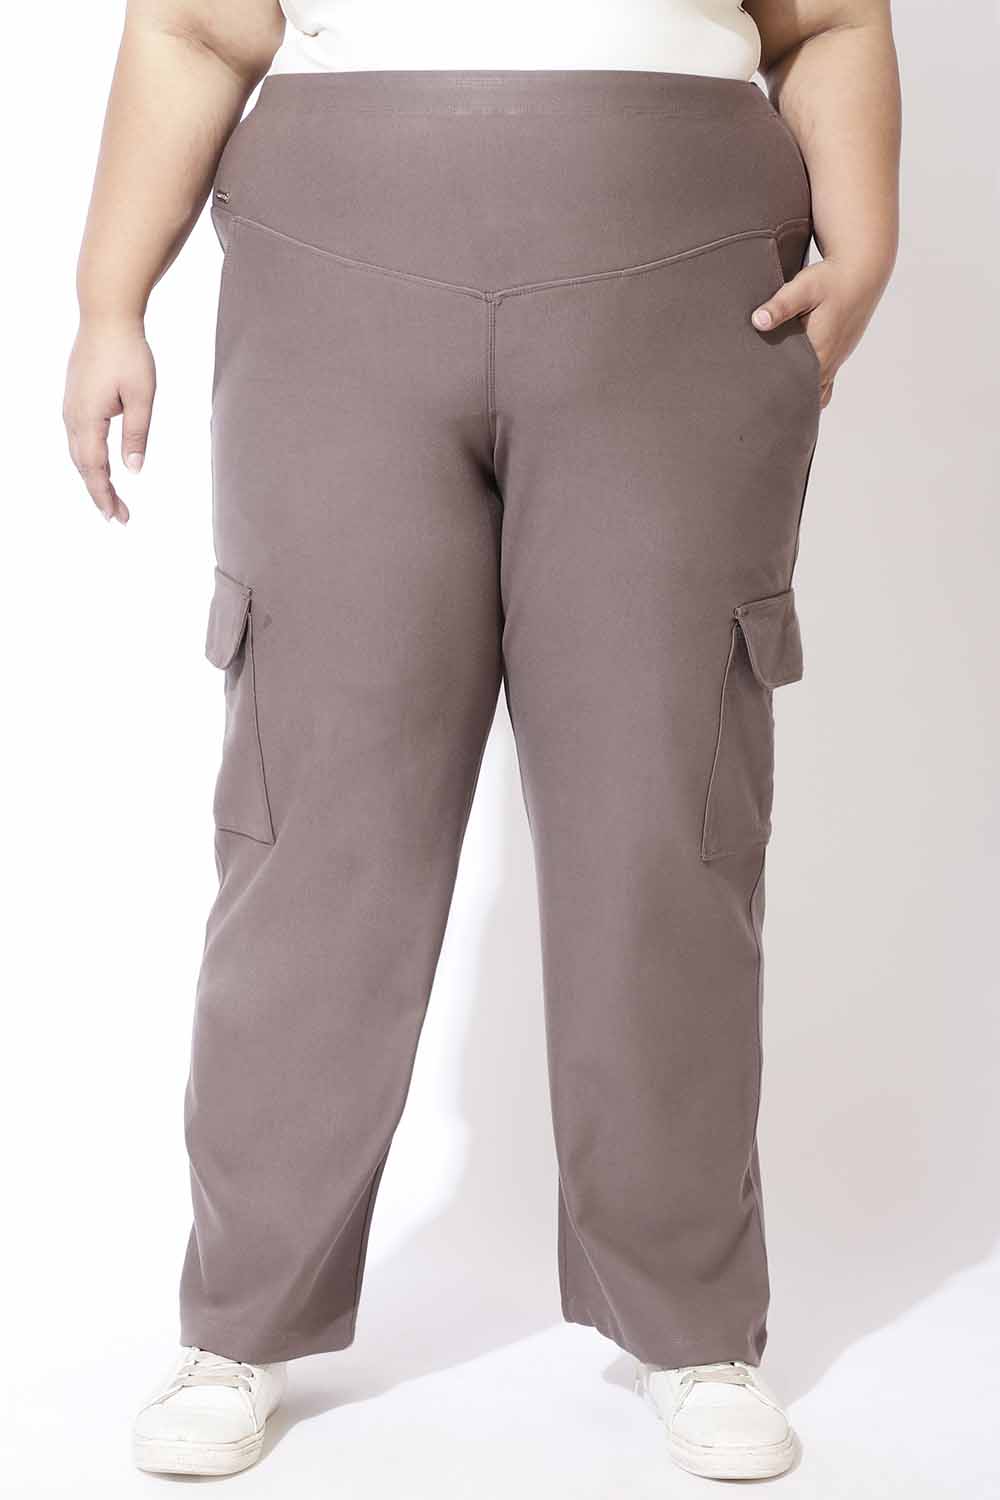 Buy Taupe Tummy Shaper Cargo Pants